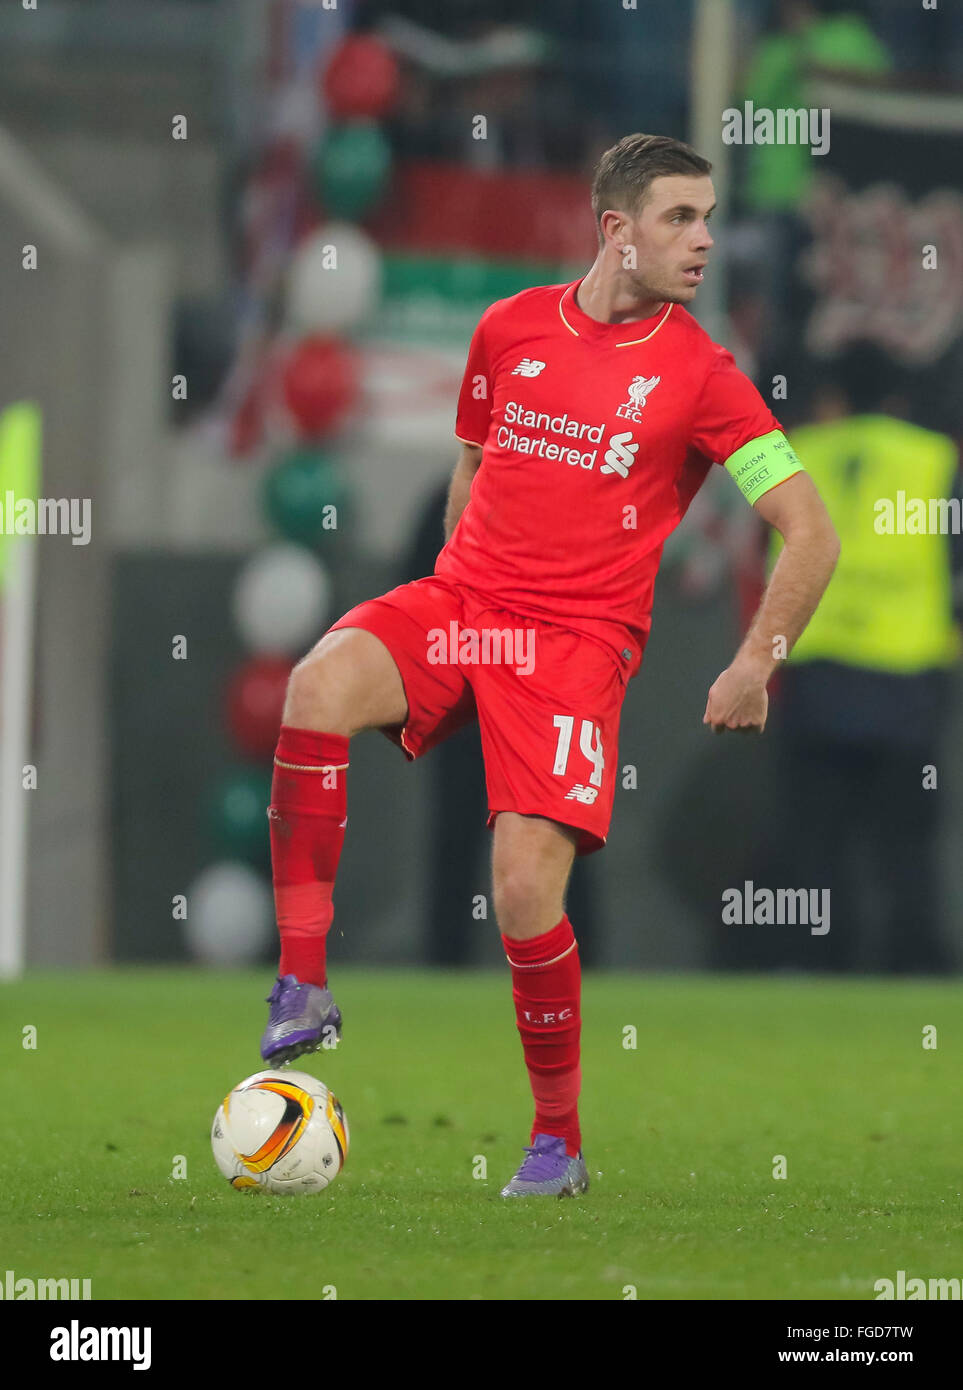 Augsburg, Germany. 18th February, 2016. Jordan HENDERSON, LIV 14 Full  figure, action, portrait, single action frame with ball, leather ball,  Spielgeraet, Soccer, Balls, official Adidas Torfabrik during the UEFA  Europa League Round